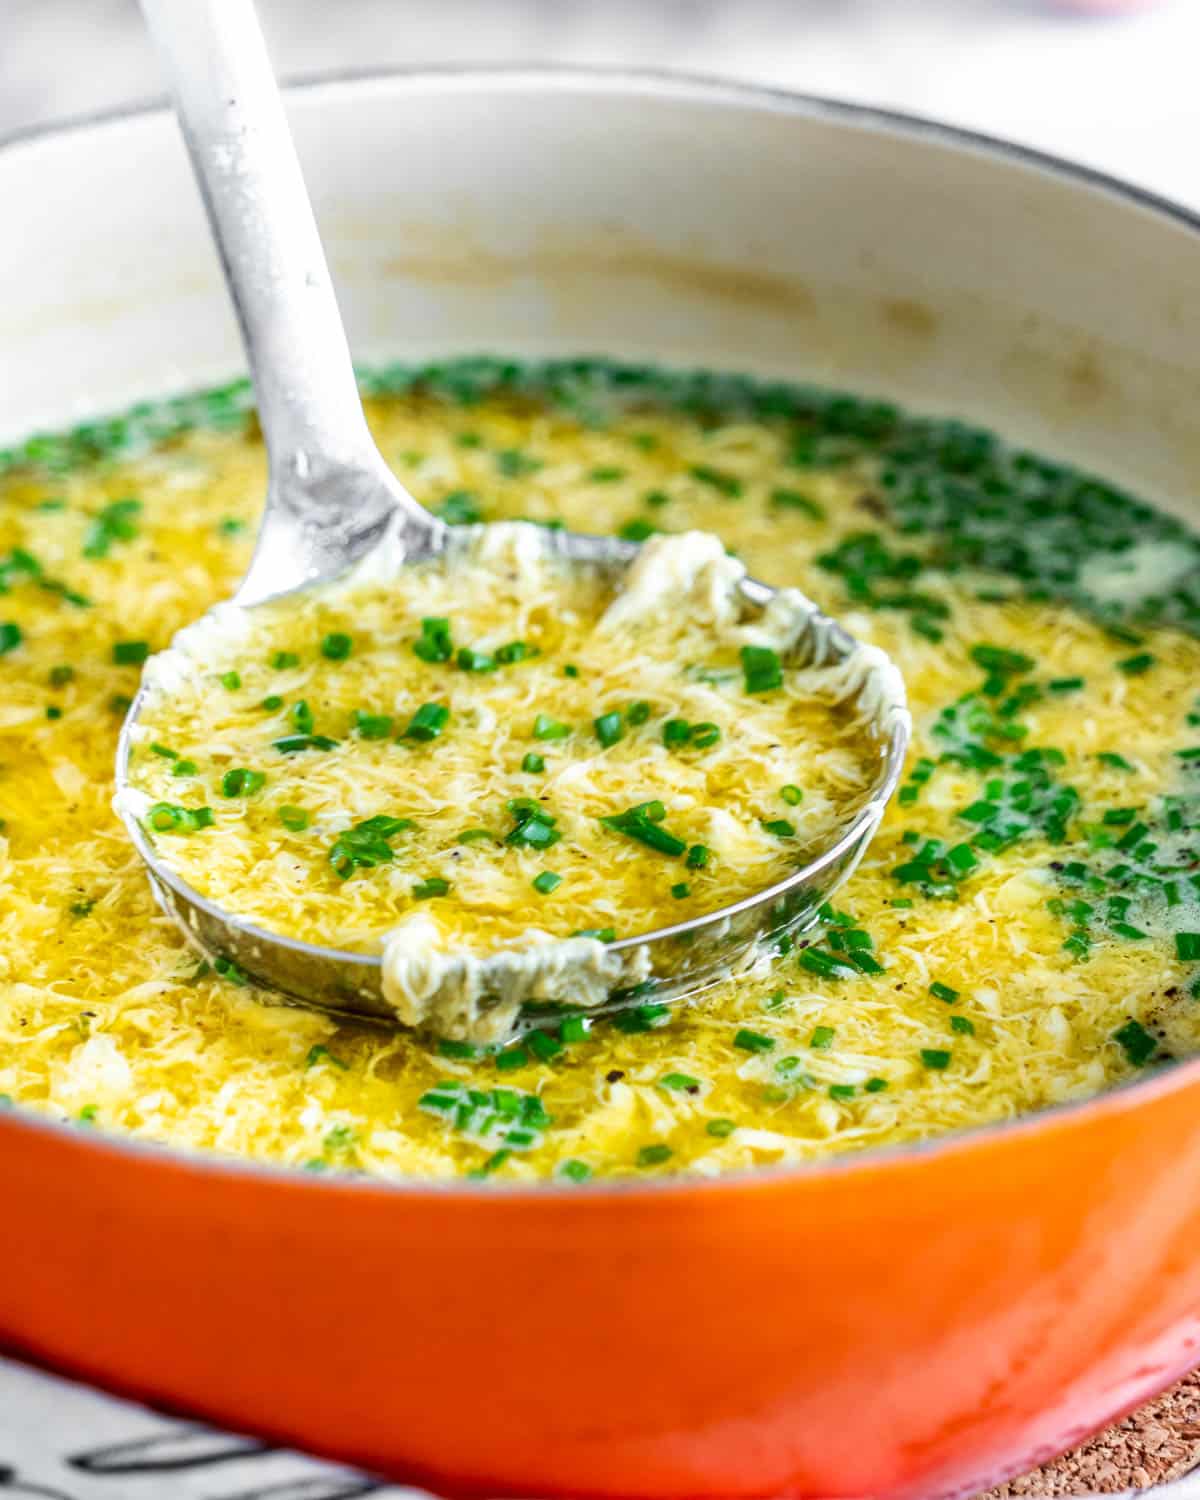 dutch oven filled with soup and a ladle holding some soup that's garnished with chives